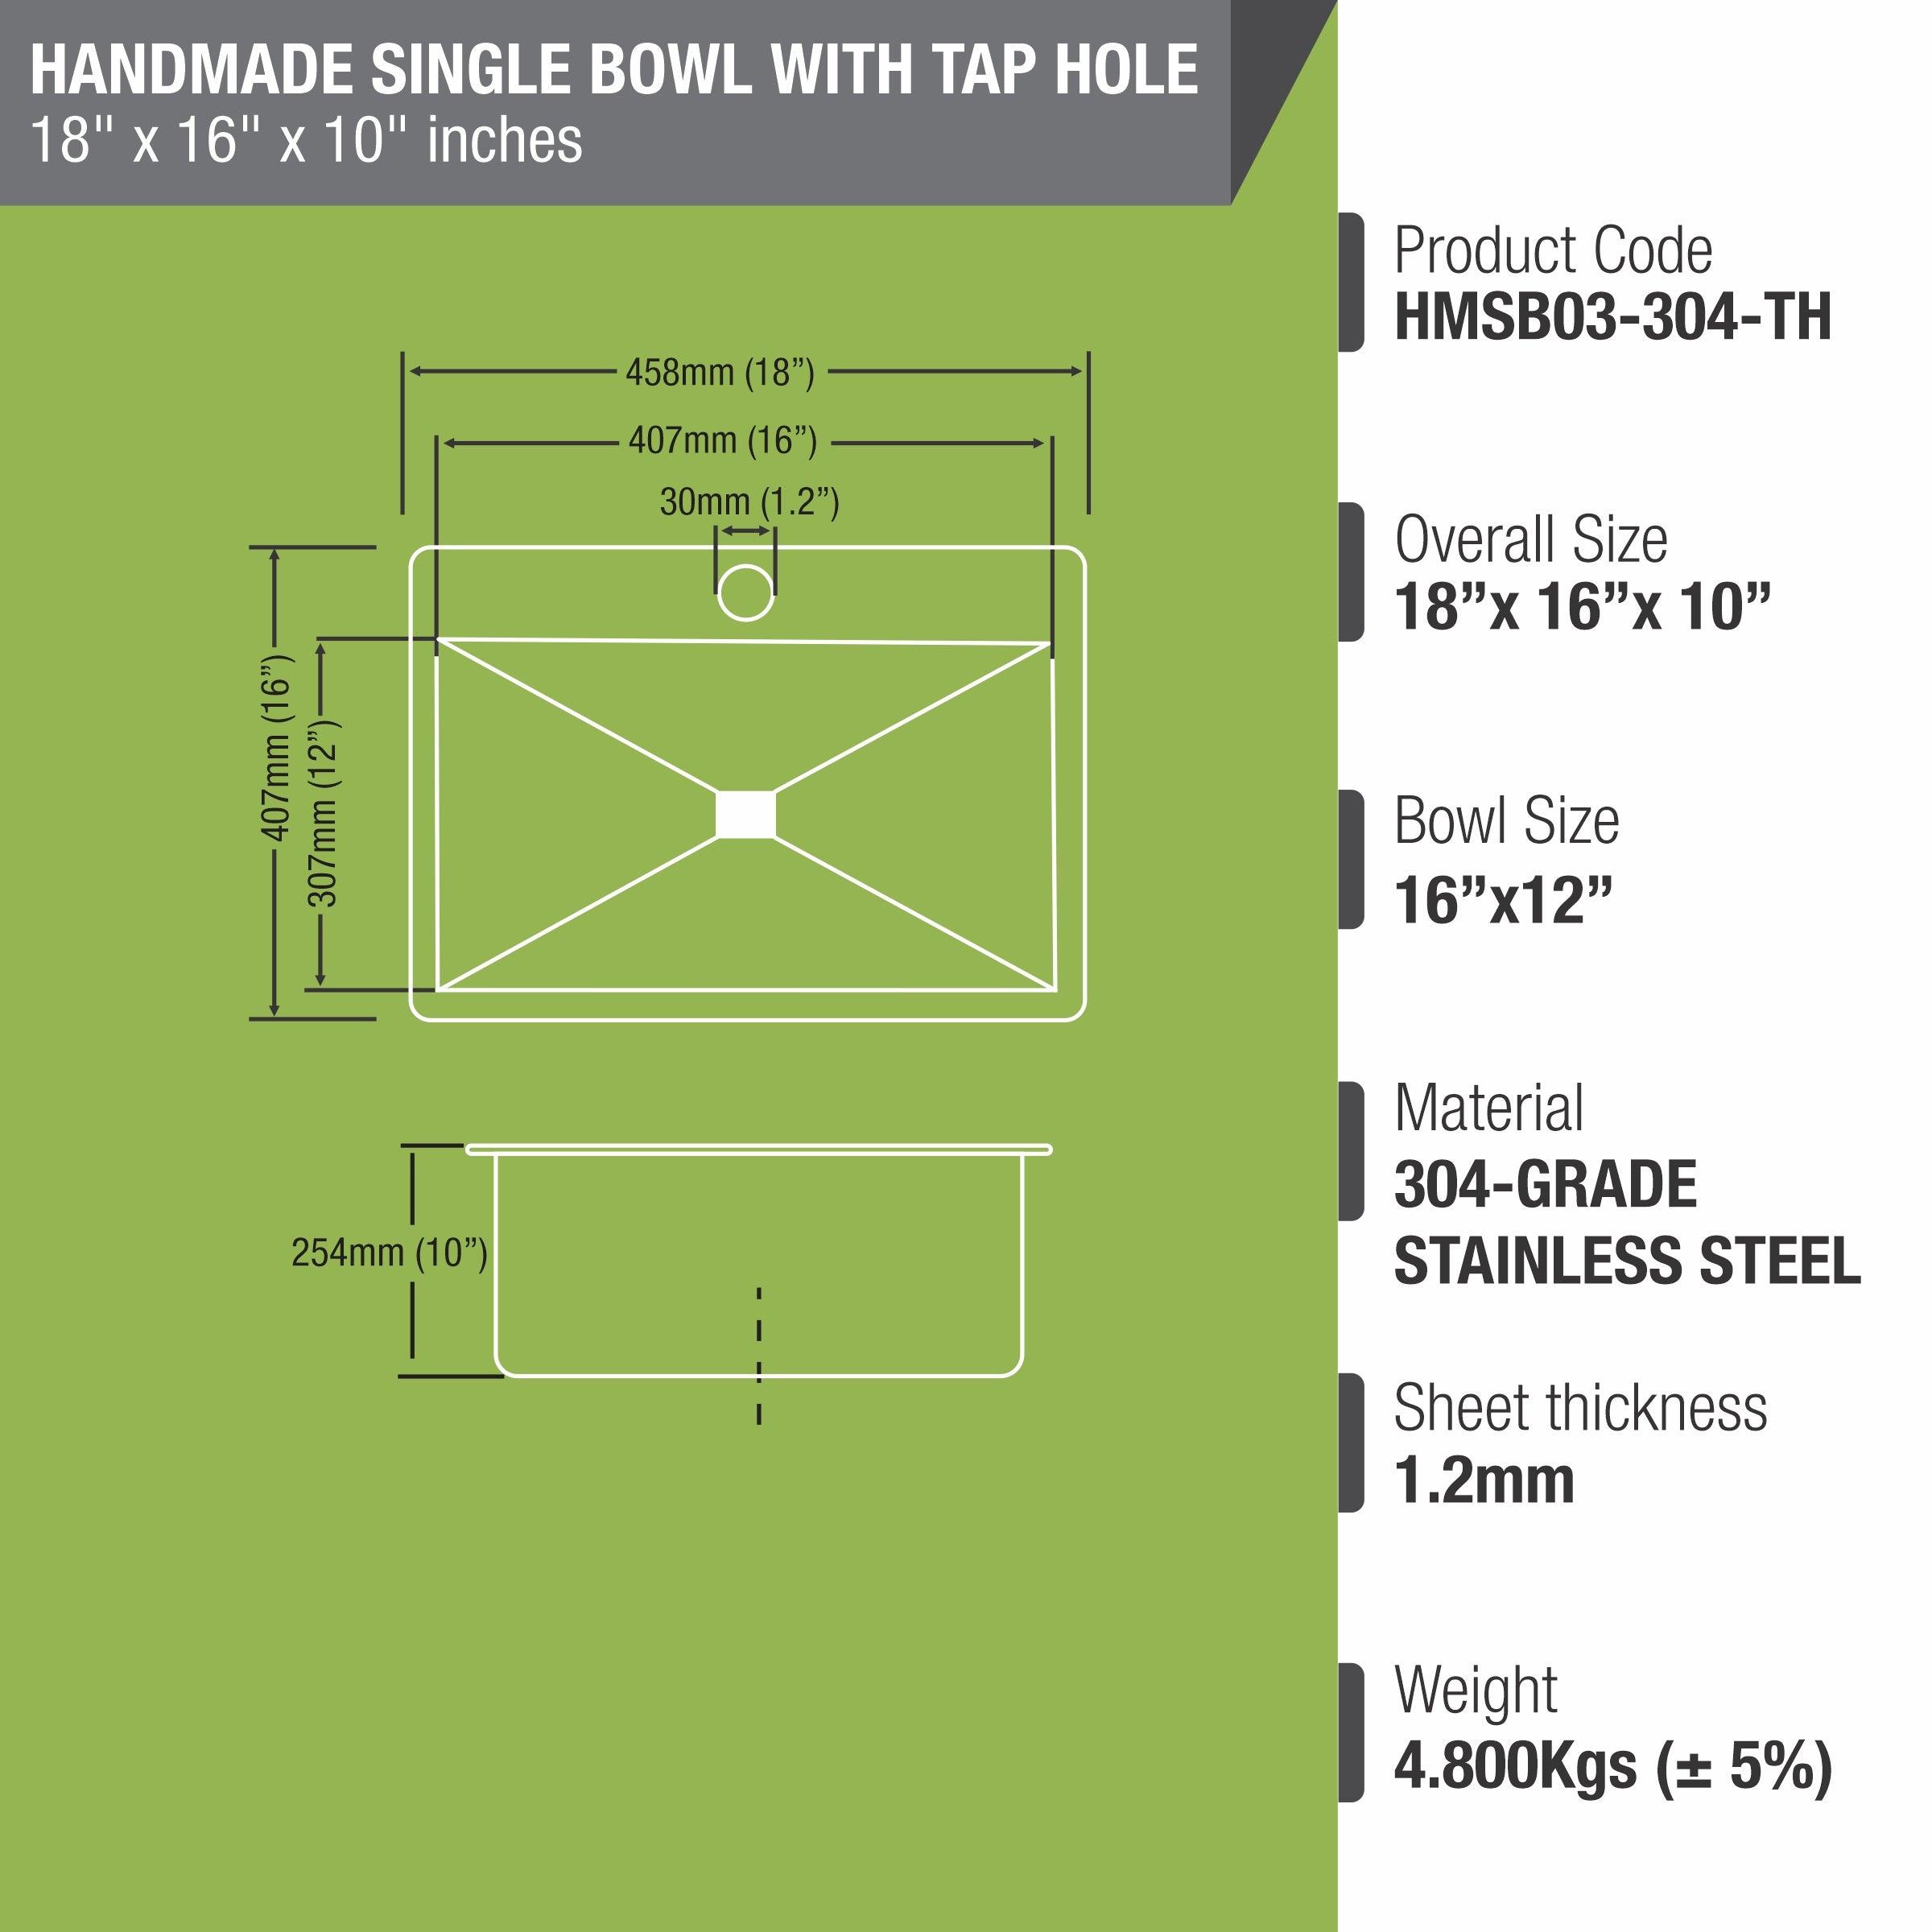 Handmade Single Bowl 304-Grade Kitchen Sink with Tap Hole (18 x 16 x 10 Inches) sizes and dimensions